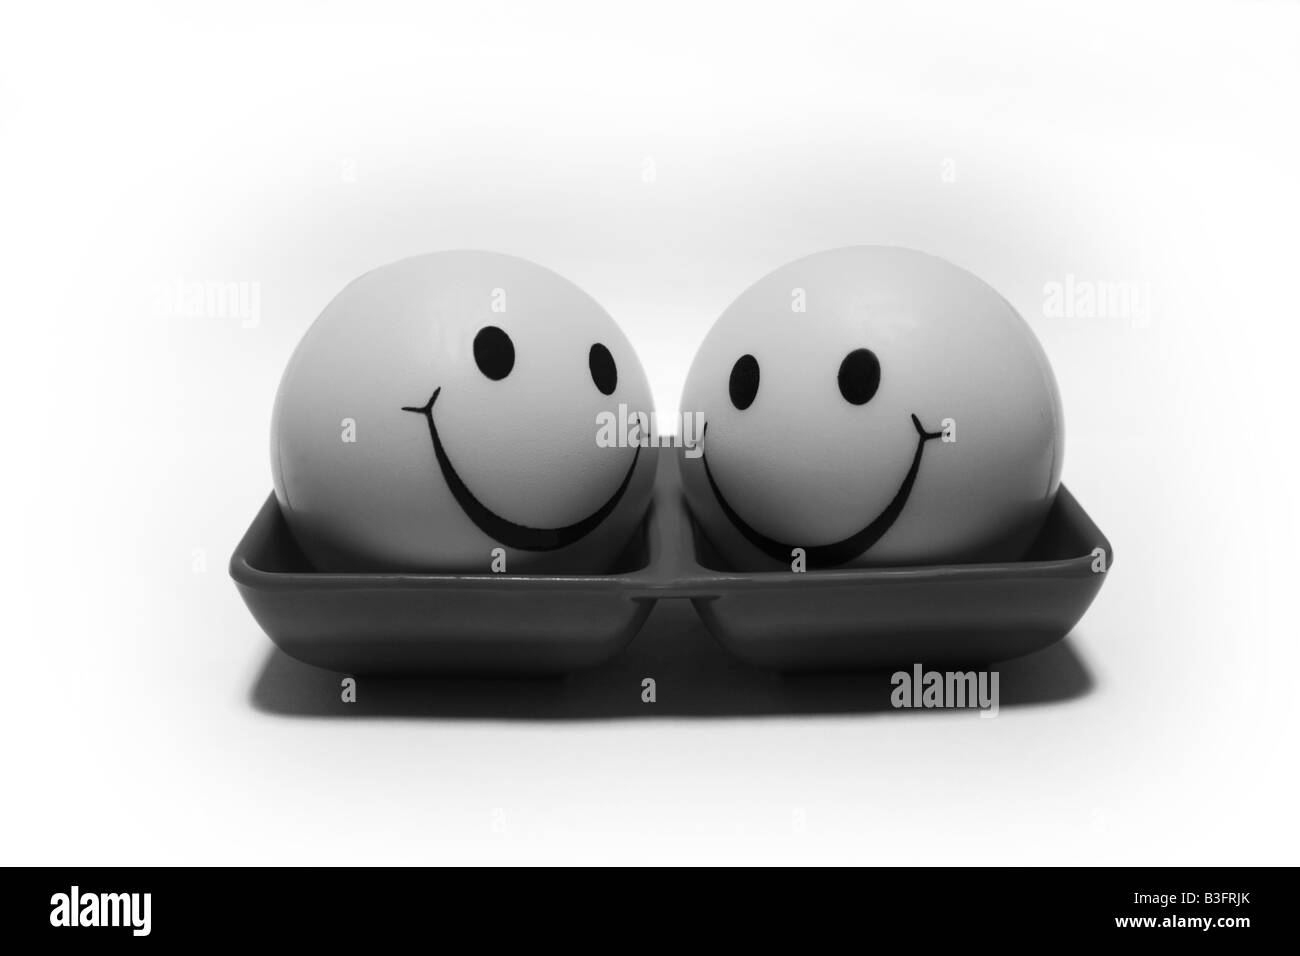 Two black and white color smiling friendly balls on a red colored double layer tray looking at each other Stock Photo